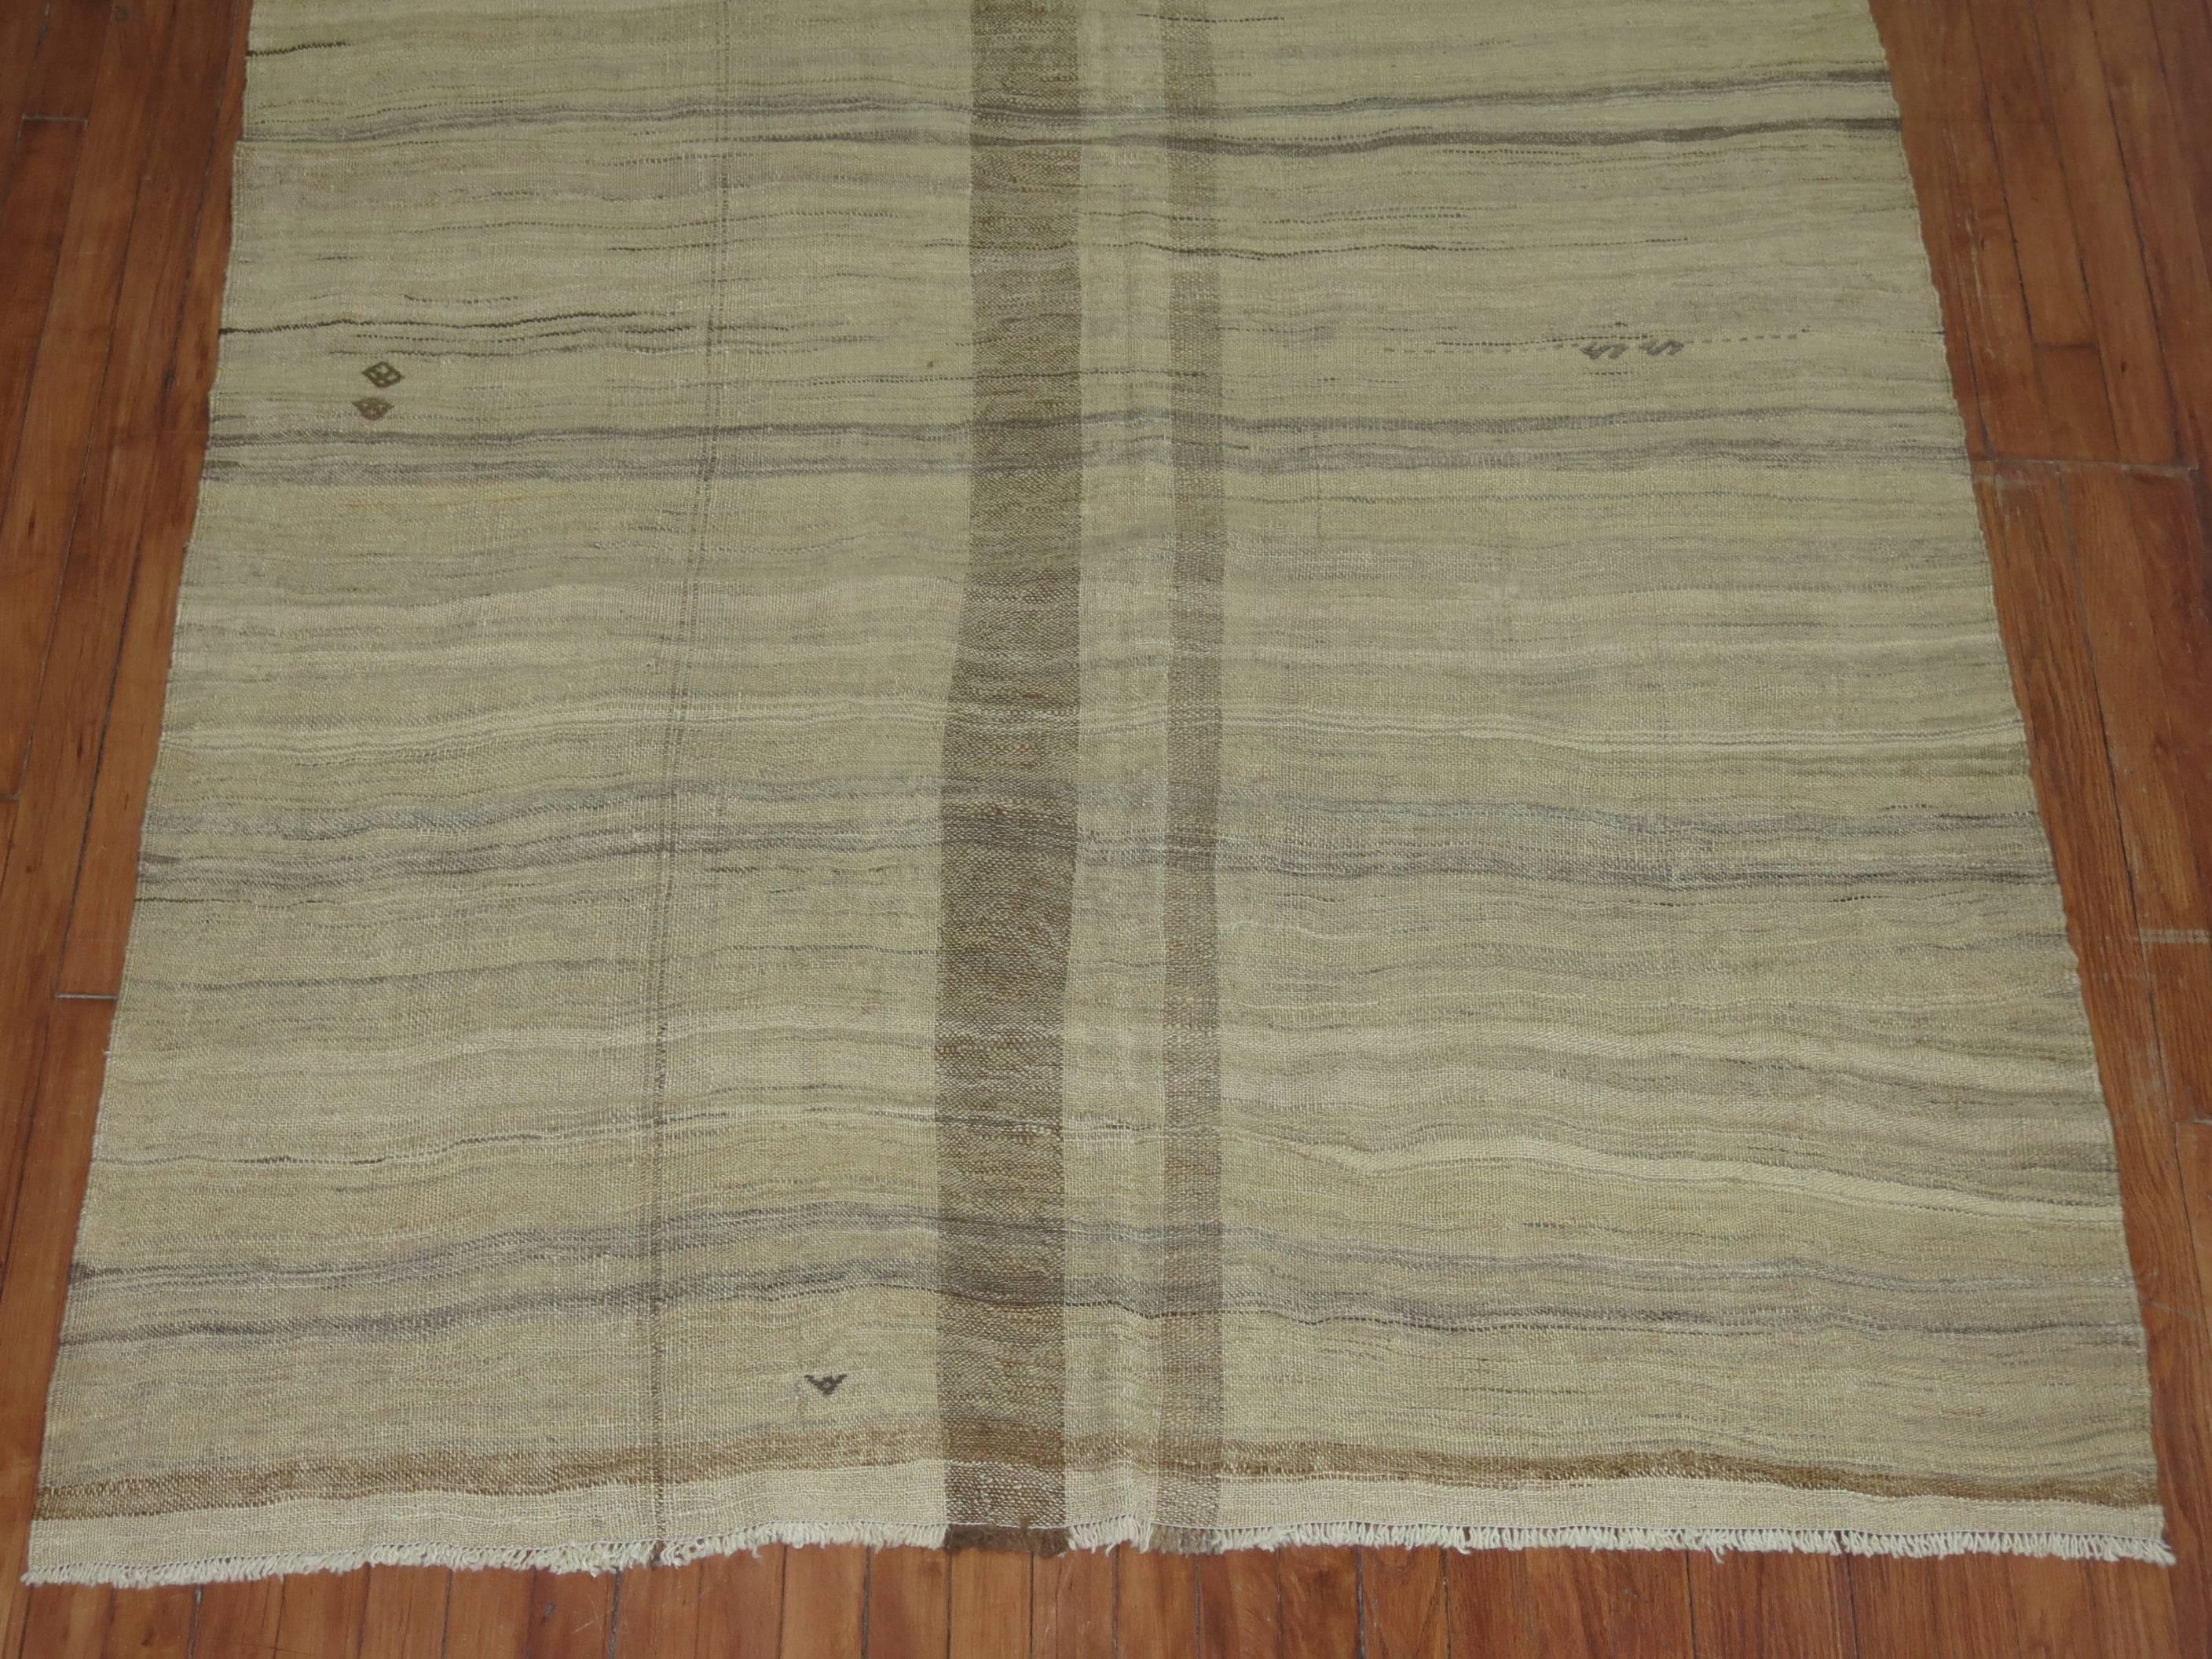 One of a kind vintage Kilim in khaki and brown accents from the mid-20th century.

Measures: 5' x 8'9